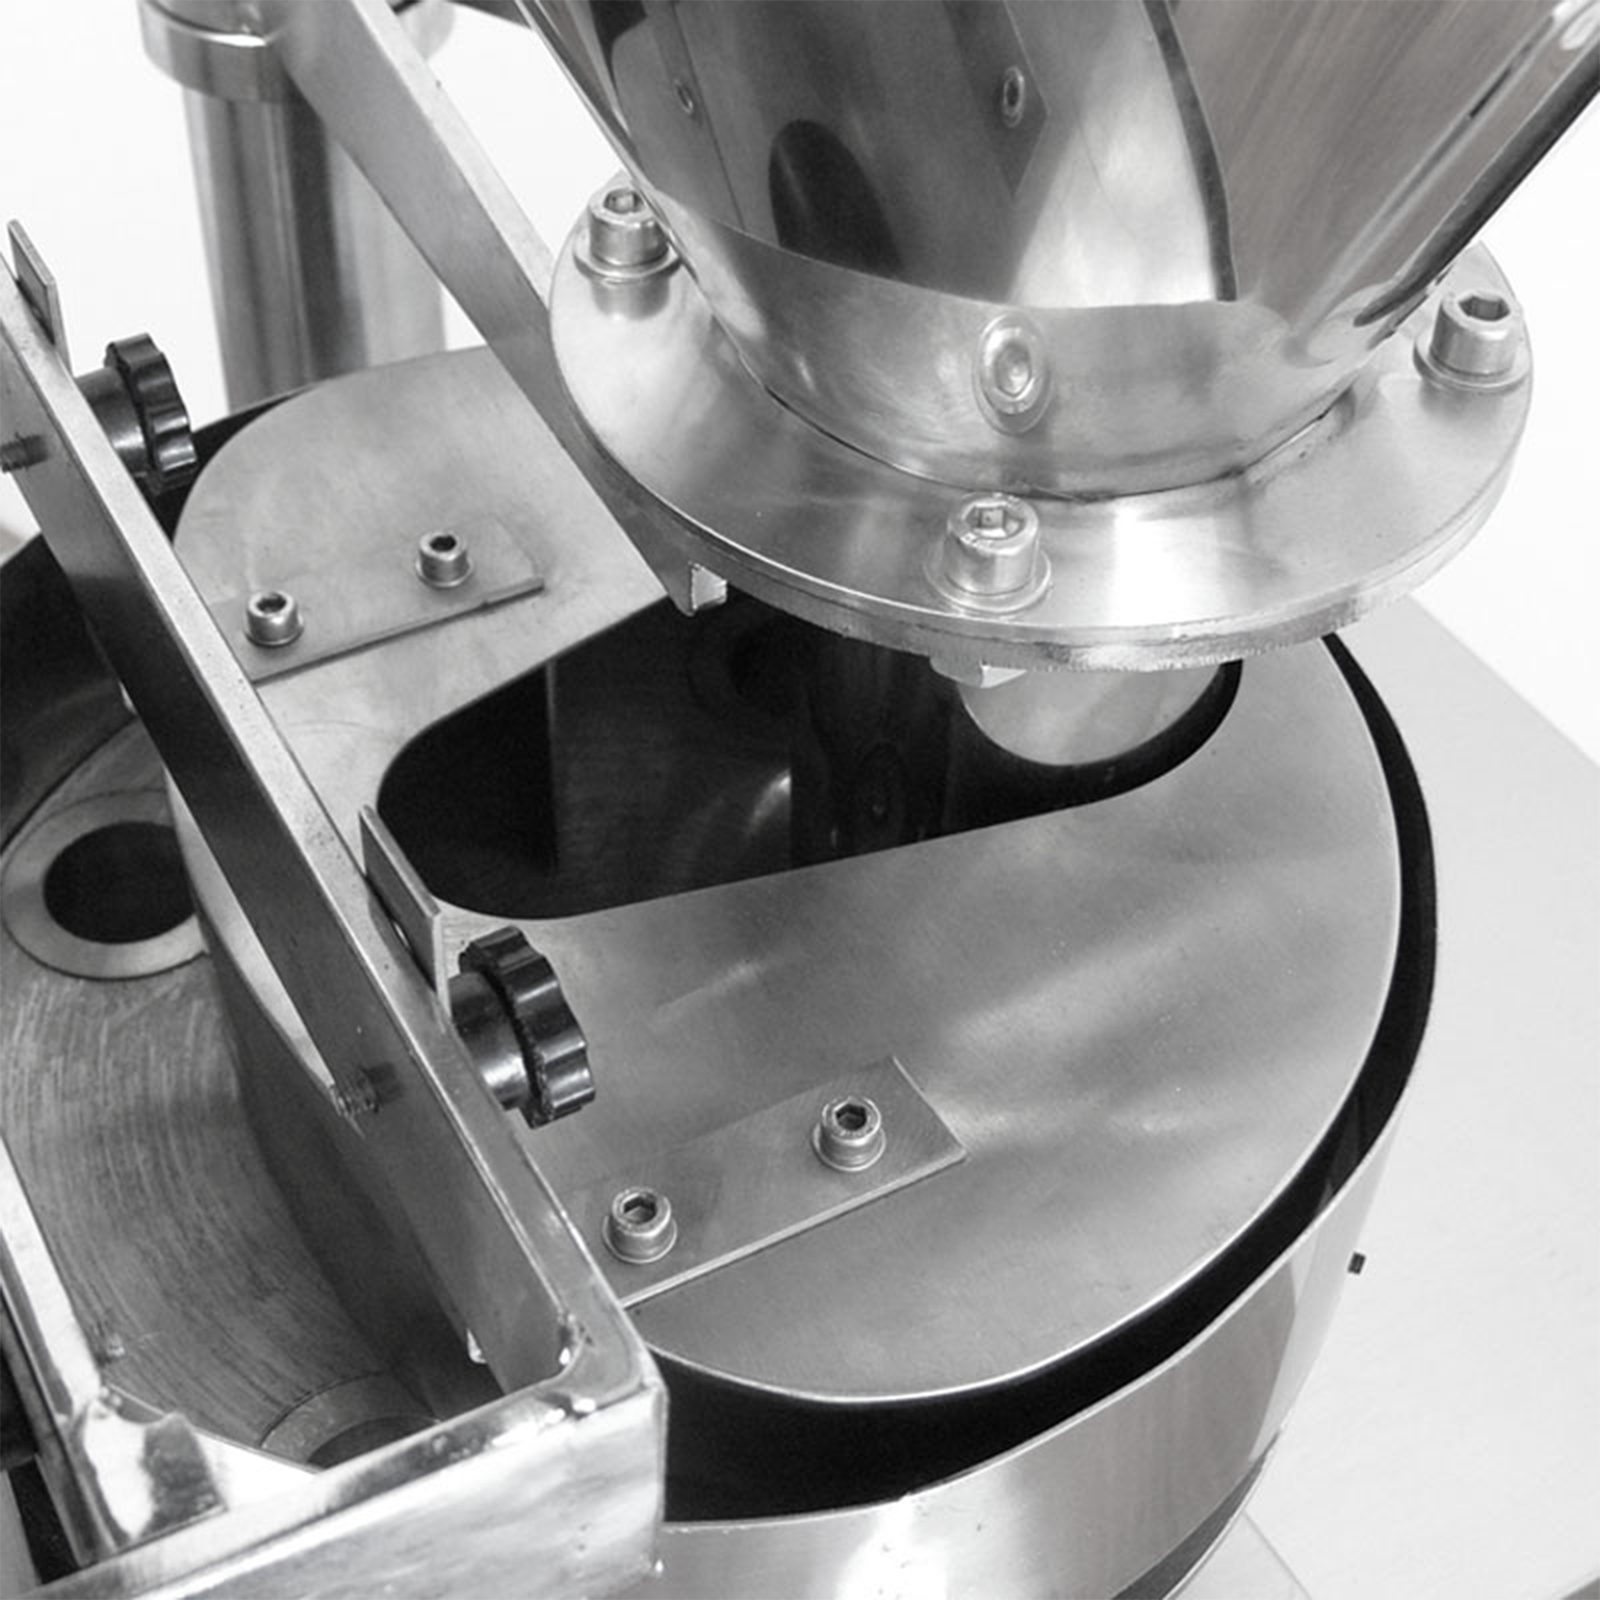 Image shows part of a VFFS vertical form fill and seal packagign system, where the stainless steel feeding hopper can be appreciated along with the rotating disc and volumetric measuring cups. 